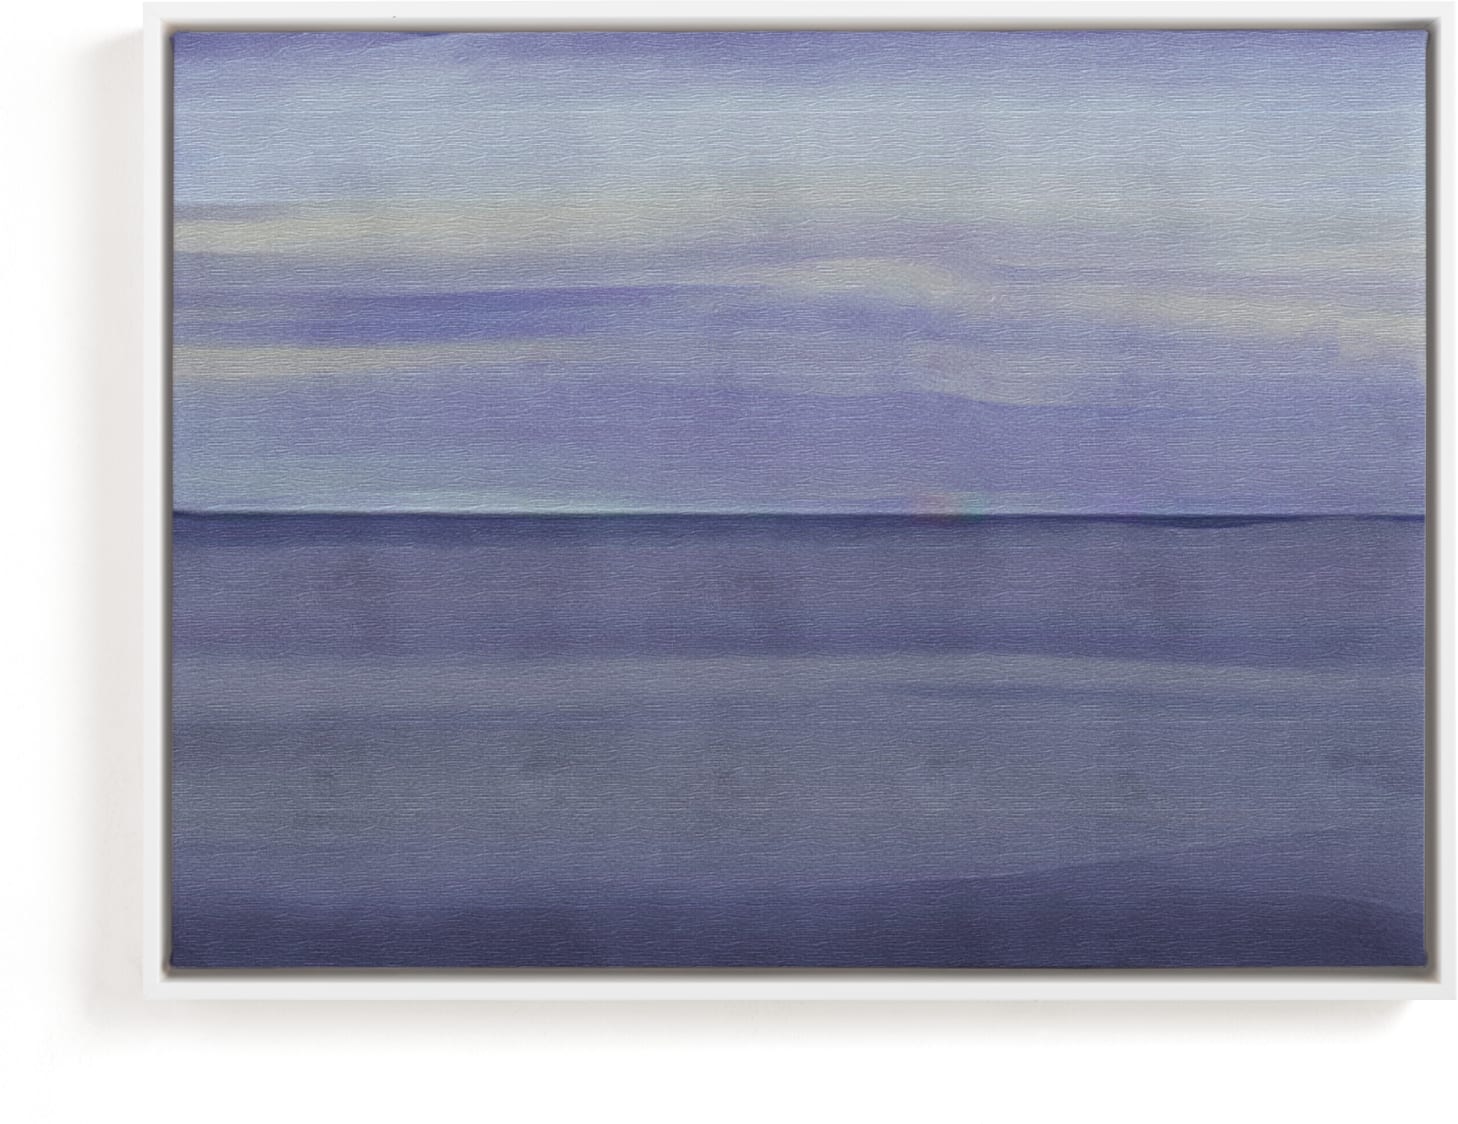 This is a purple art by Cass Imagines called Blue Horizon.